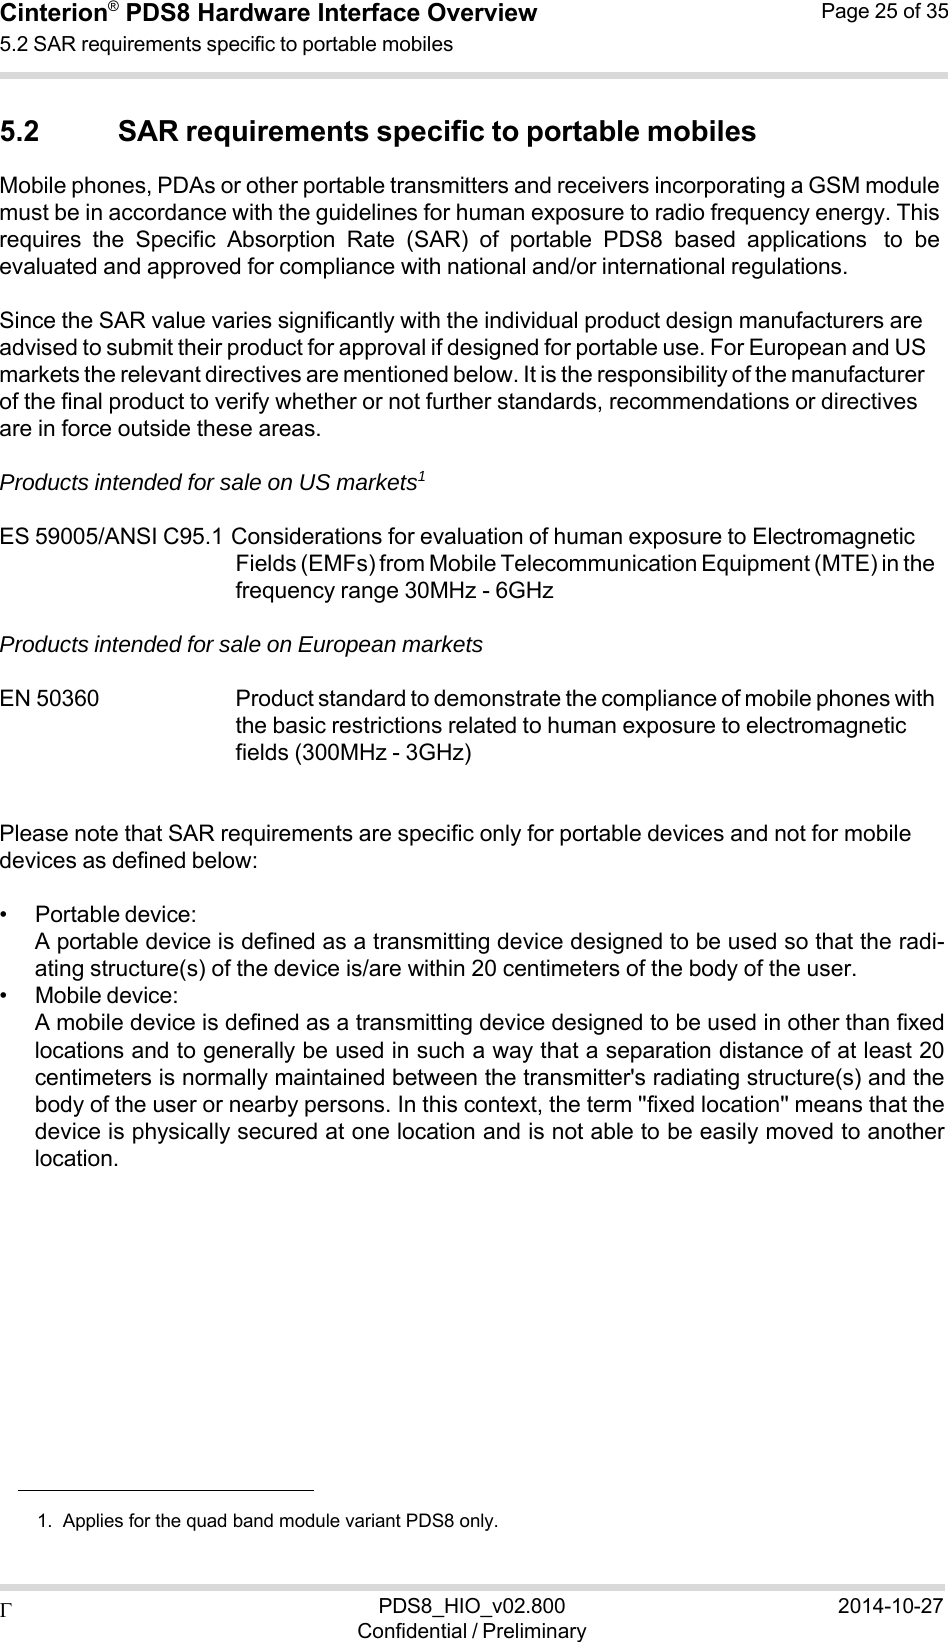  PDS8_HIO_v02.800Confidential / Preliminary2014-10-27Cinterion®  PDS8 Hardware Interface Overview 5.2 SAR requirements specific to portable mobiles Page 25 of 35   5.2 SAR requirements specific to portable mobiles Mobile phones, PDAs or other portable transmitters and receivers incorporating a GSM module must be in accordance with the guidelines for human exposure to radio frequency energy. This requires  the  Specific  Absorption  Rate  (SAR)  of  portable  PDS8  based  applications to  be evaluated and approved for compliance with national and/or international regulations.  Since the SAR value varies significantly with the individual product design manufacturers are advised to submit their product for approval if designed for portable use. For European and US markets the relevant directives are mentioned below. It is the responsibility of the manufacturer of the final product to verify whether or not further standards, recommendations or directives are in force outside these areas.  Products intended for sale on US markets1  ES 59005/ANSI C95.1 Considerations for evaluation of human exposure to Electromagnetic Fields (EMFs) from Mobile Telecommunication Equipment (MTE) in the frequency range 30MHz - 6GHz  Products intended for sale on European markets  EN 50360   Product standard to demonstrate the compliance of mobile phones with the basic restrictions related to human exposure to electromagnetic fields (300MHz - 3GHz)   Please note that SAR requirements are specific only for portable devices and not for mobile devices as defined below:  • Portable device: A portable device is defined as a transmitting device designed to be used so that the radi- ating structure(s) of the device is/are within 20 centimeters of the body of the user. • Mobile device: A mobile device is defined as a transmitting device designed to be used in other than fixed locations and to generally be used in such a way that a separation distance of at least 20 centimeters is normally maintained between the transmitter&apos;s radiating structure(s) and the body of the user or nearby persons. In this context, the term &apos;&apos;fixed location&apos;&apos; means that the device is physically secured at one location and is not able to be easily moved to another location.                1.  Applies for the quad band module variant PDS8 only. 